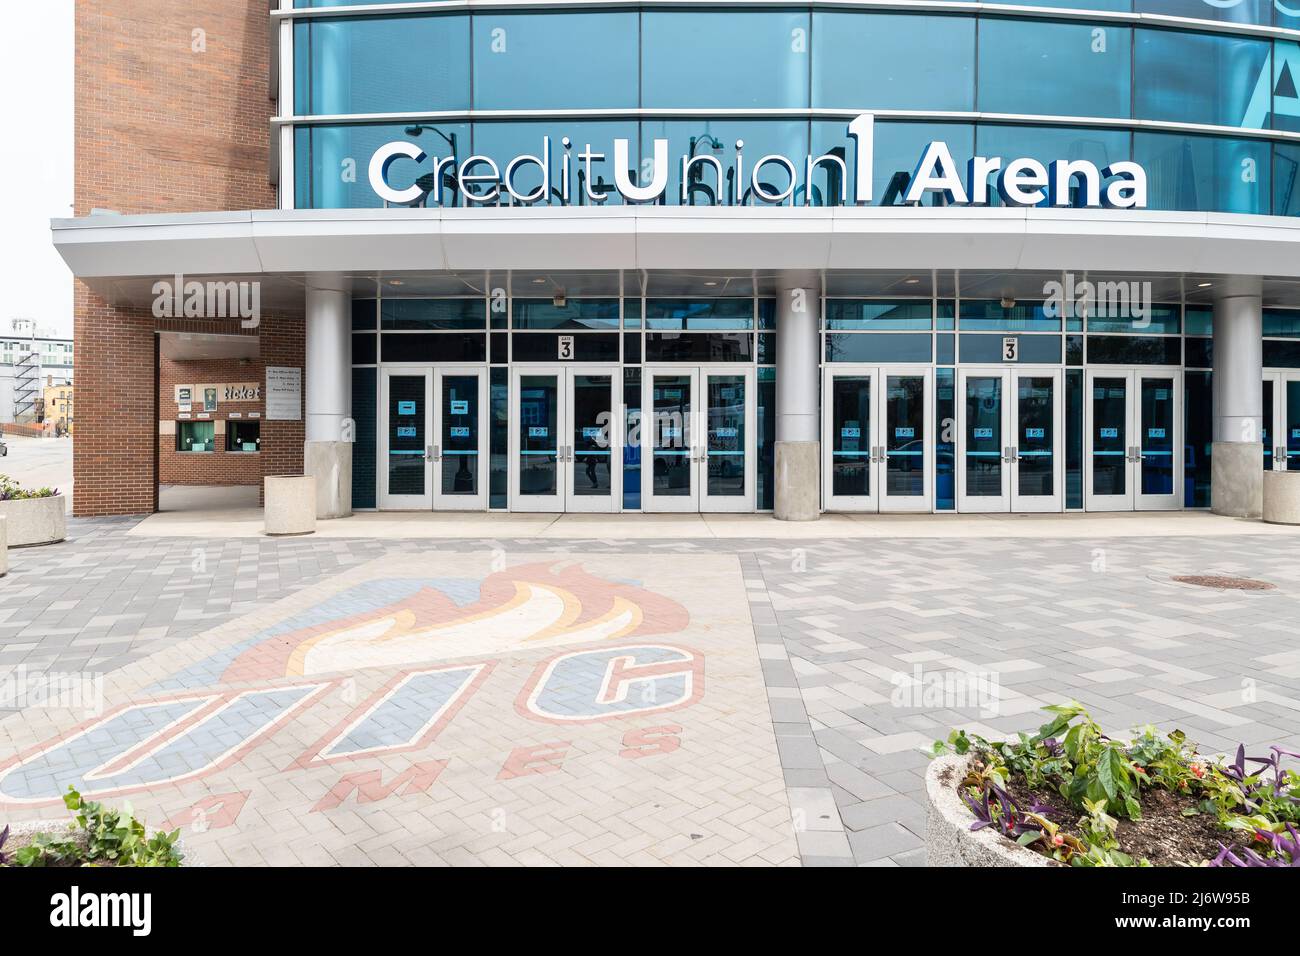 The Credit Union 1 Arena is the stadium of the University of Illinois at Chicago's Chicago Flames Basketball team and hosting other performances. Stock Photo